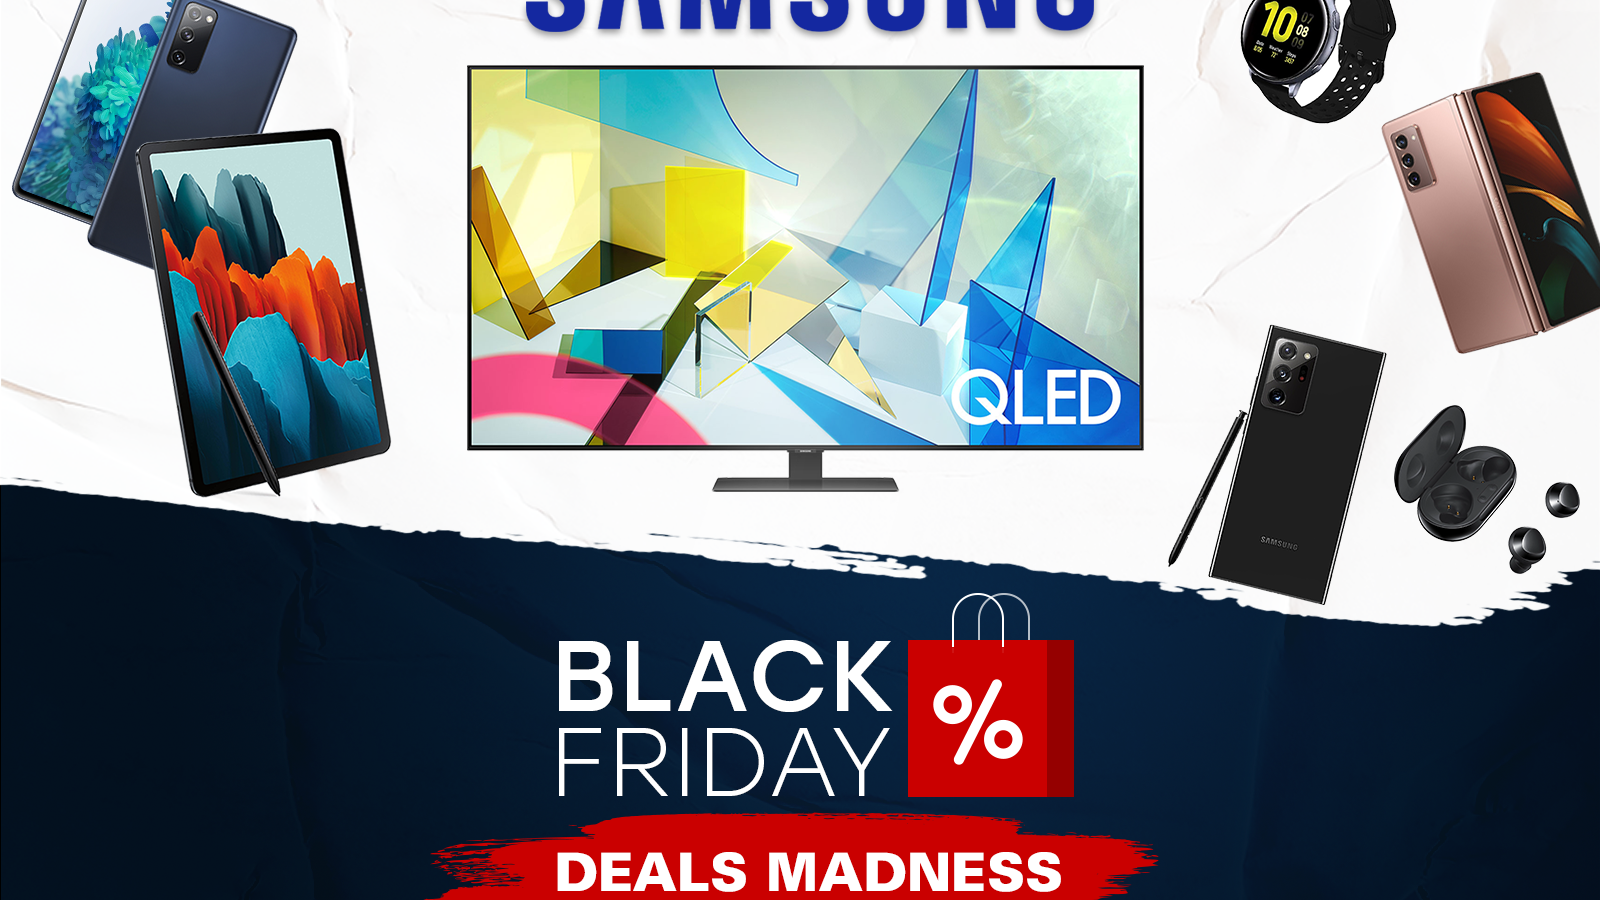 Samsung refreshes Black Friday offers, get 3,000 off on select TVs